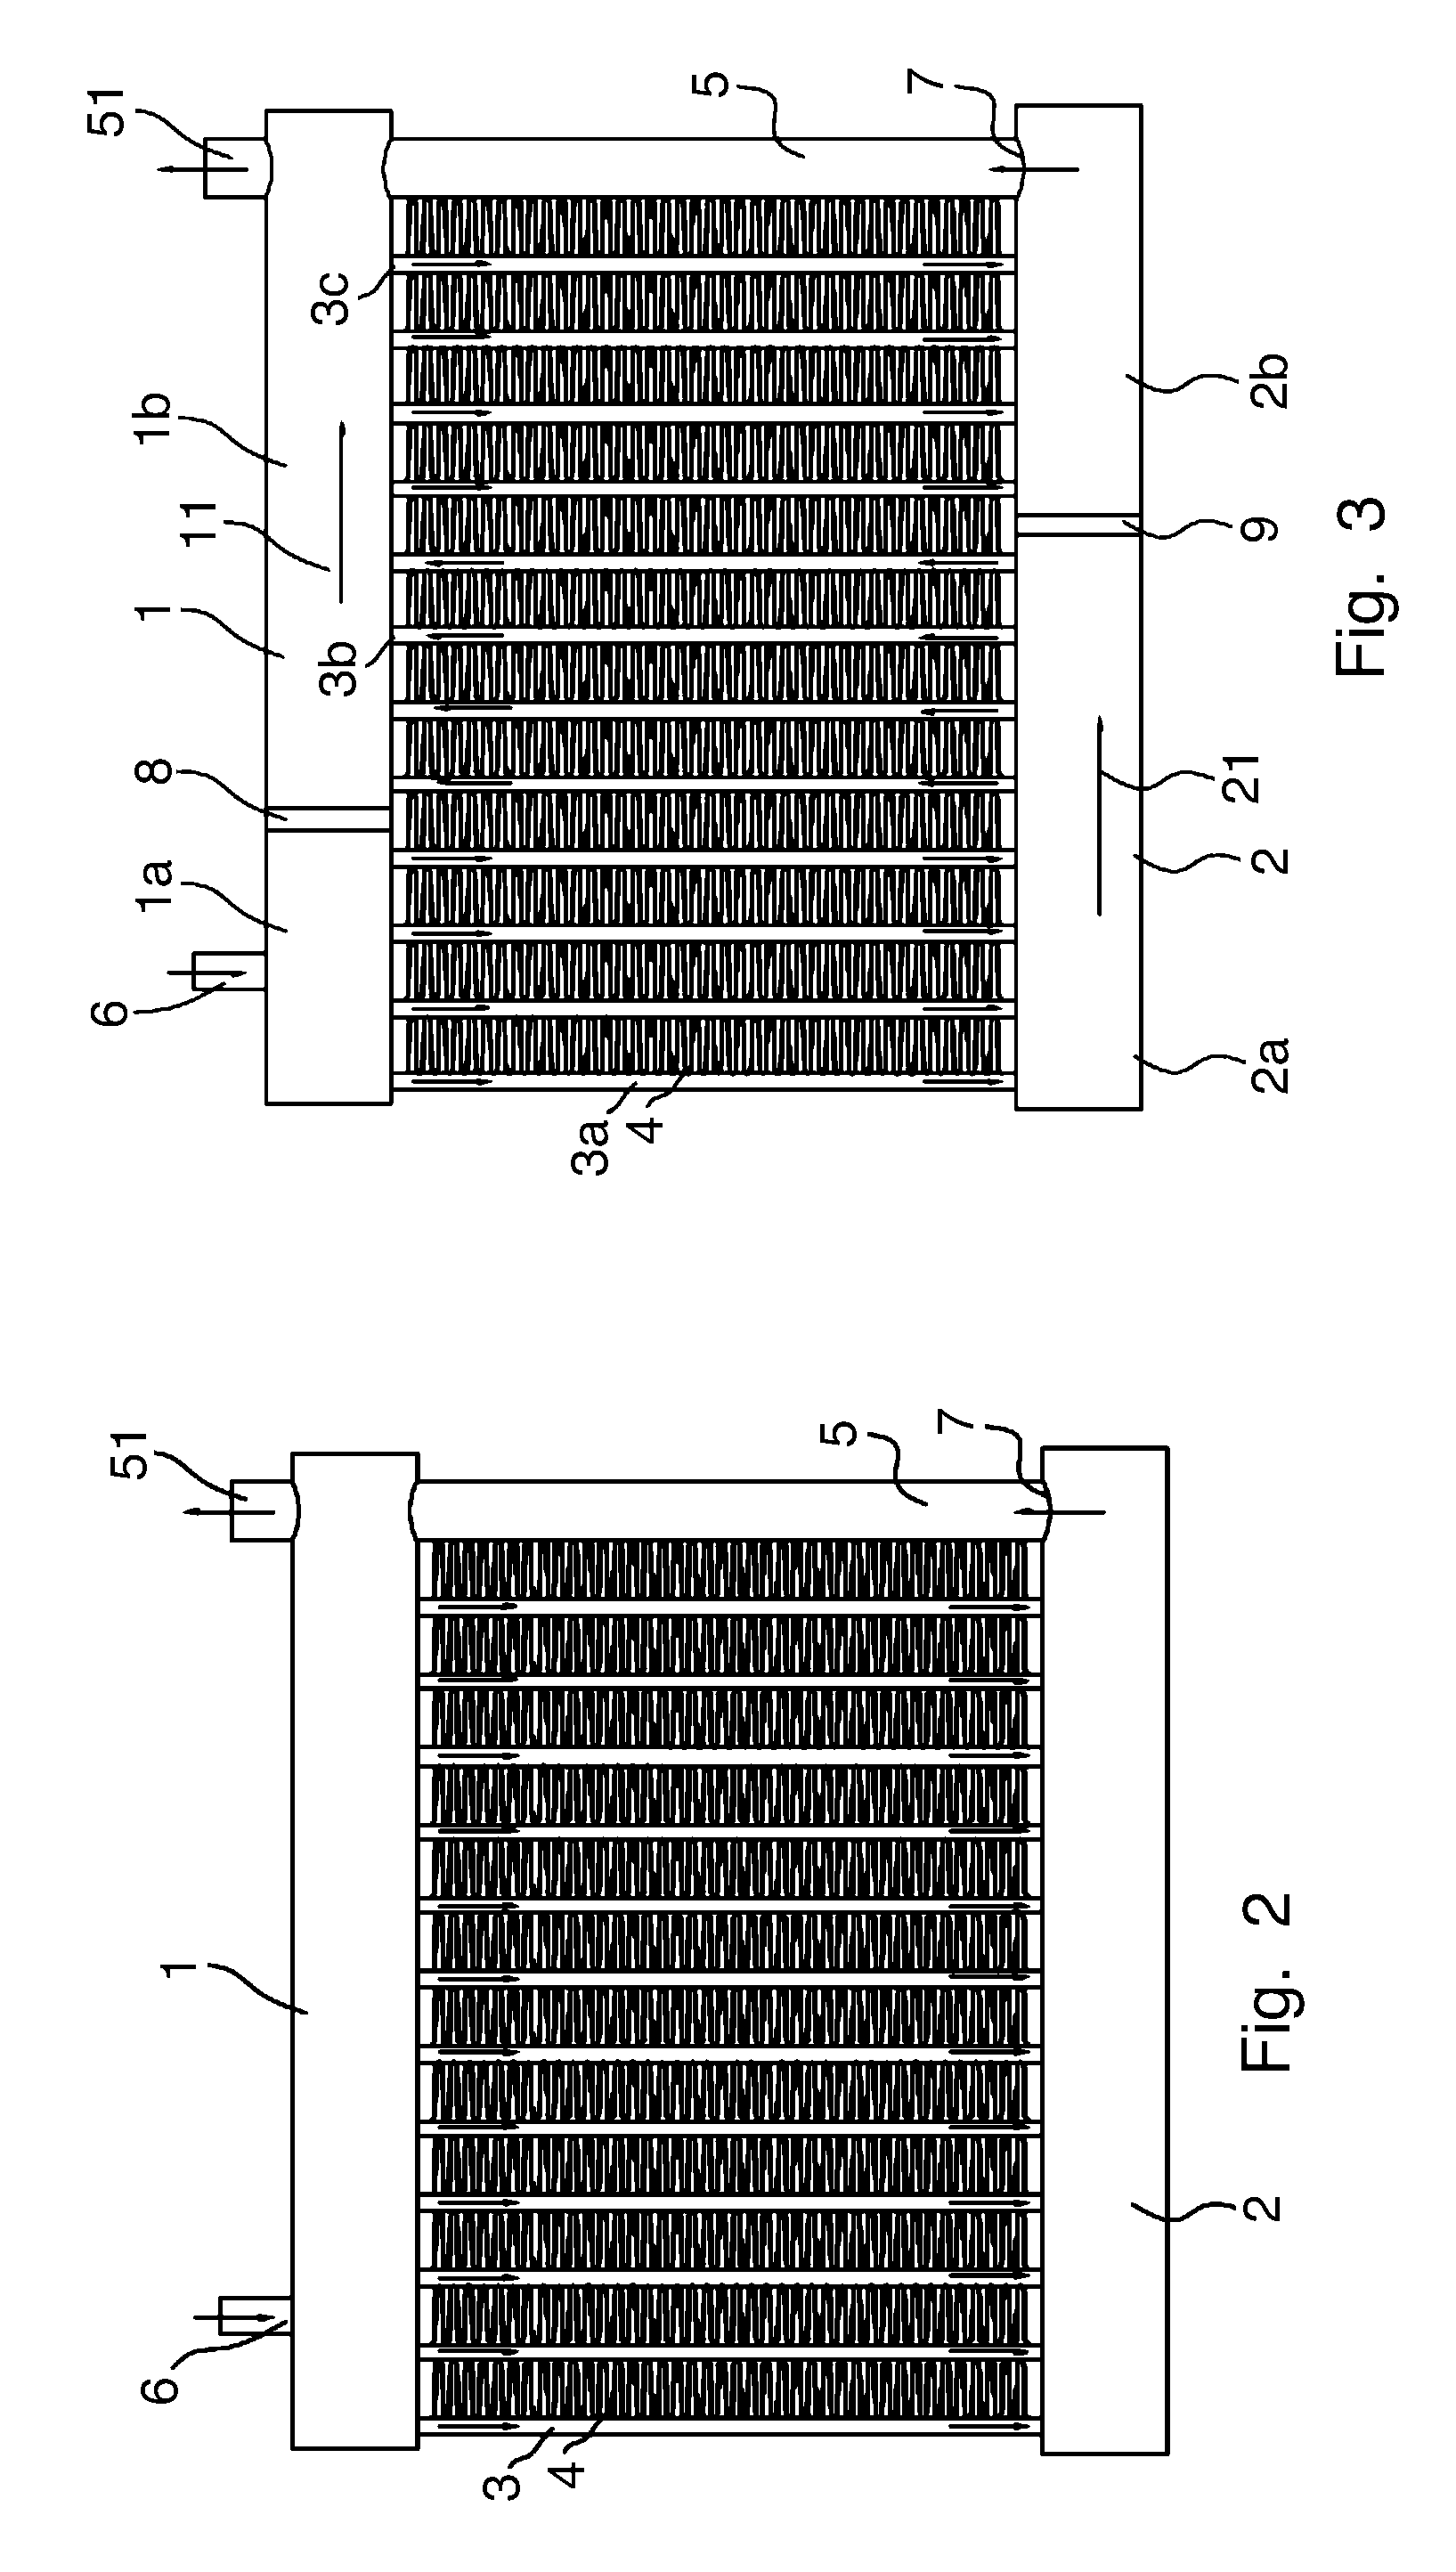 Micro-channel heat exchanger